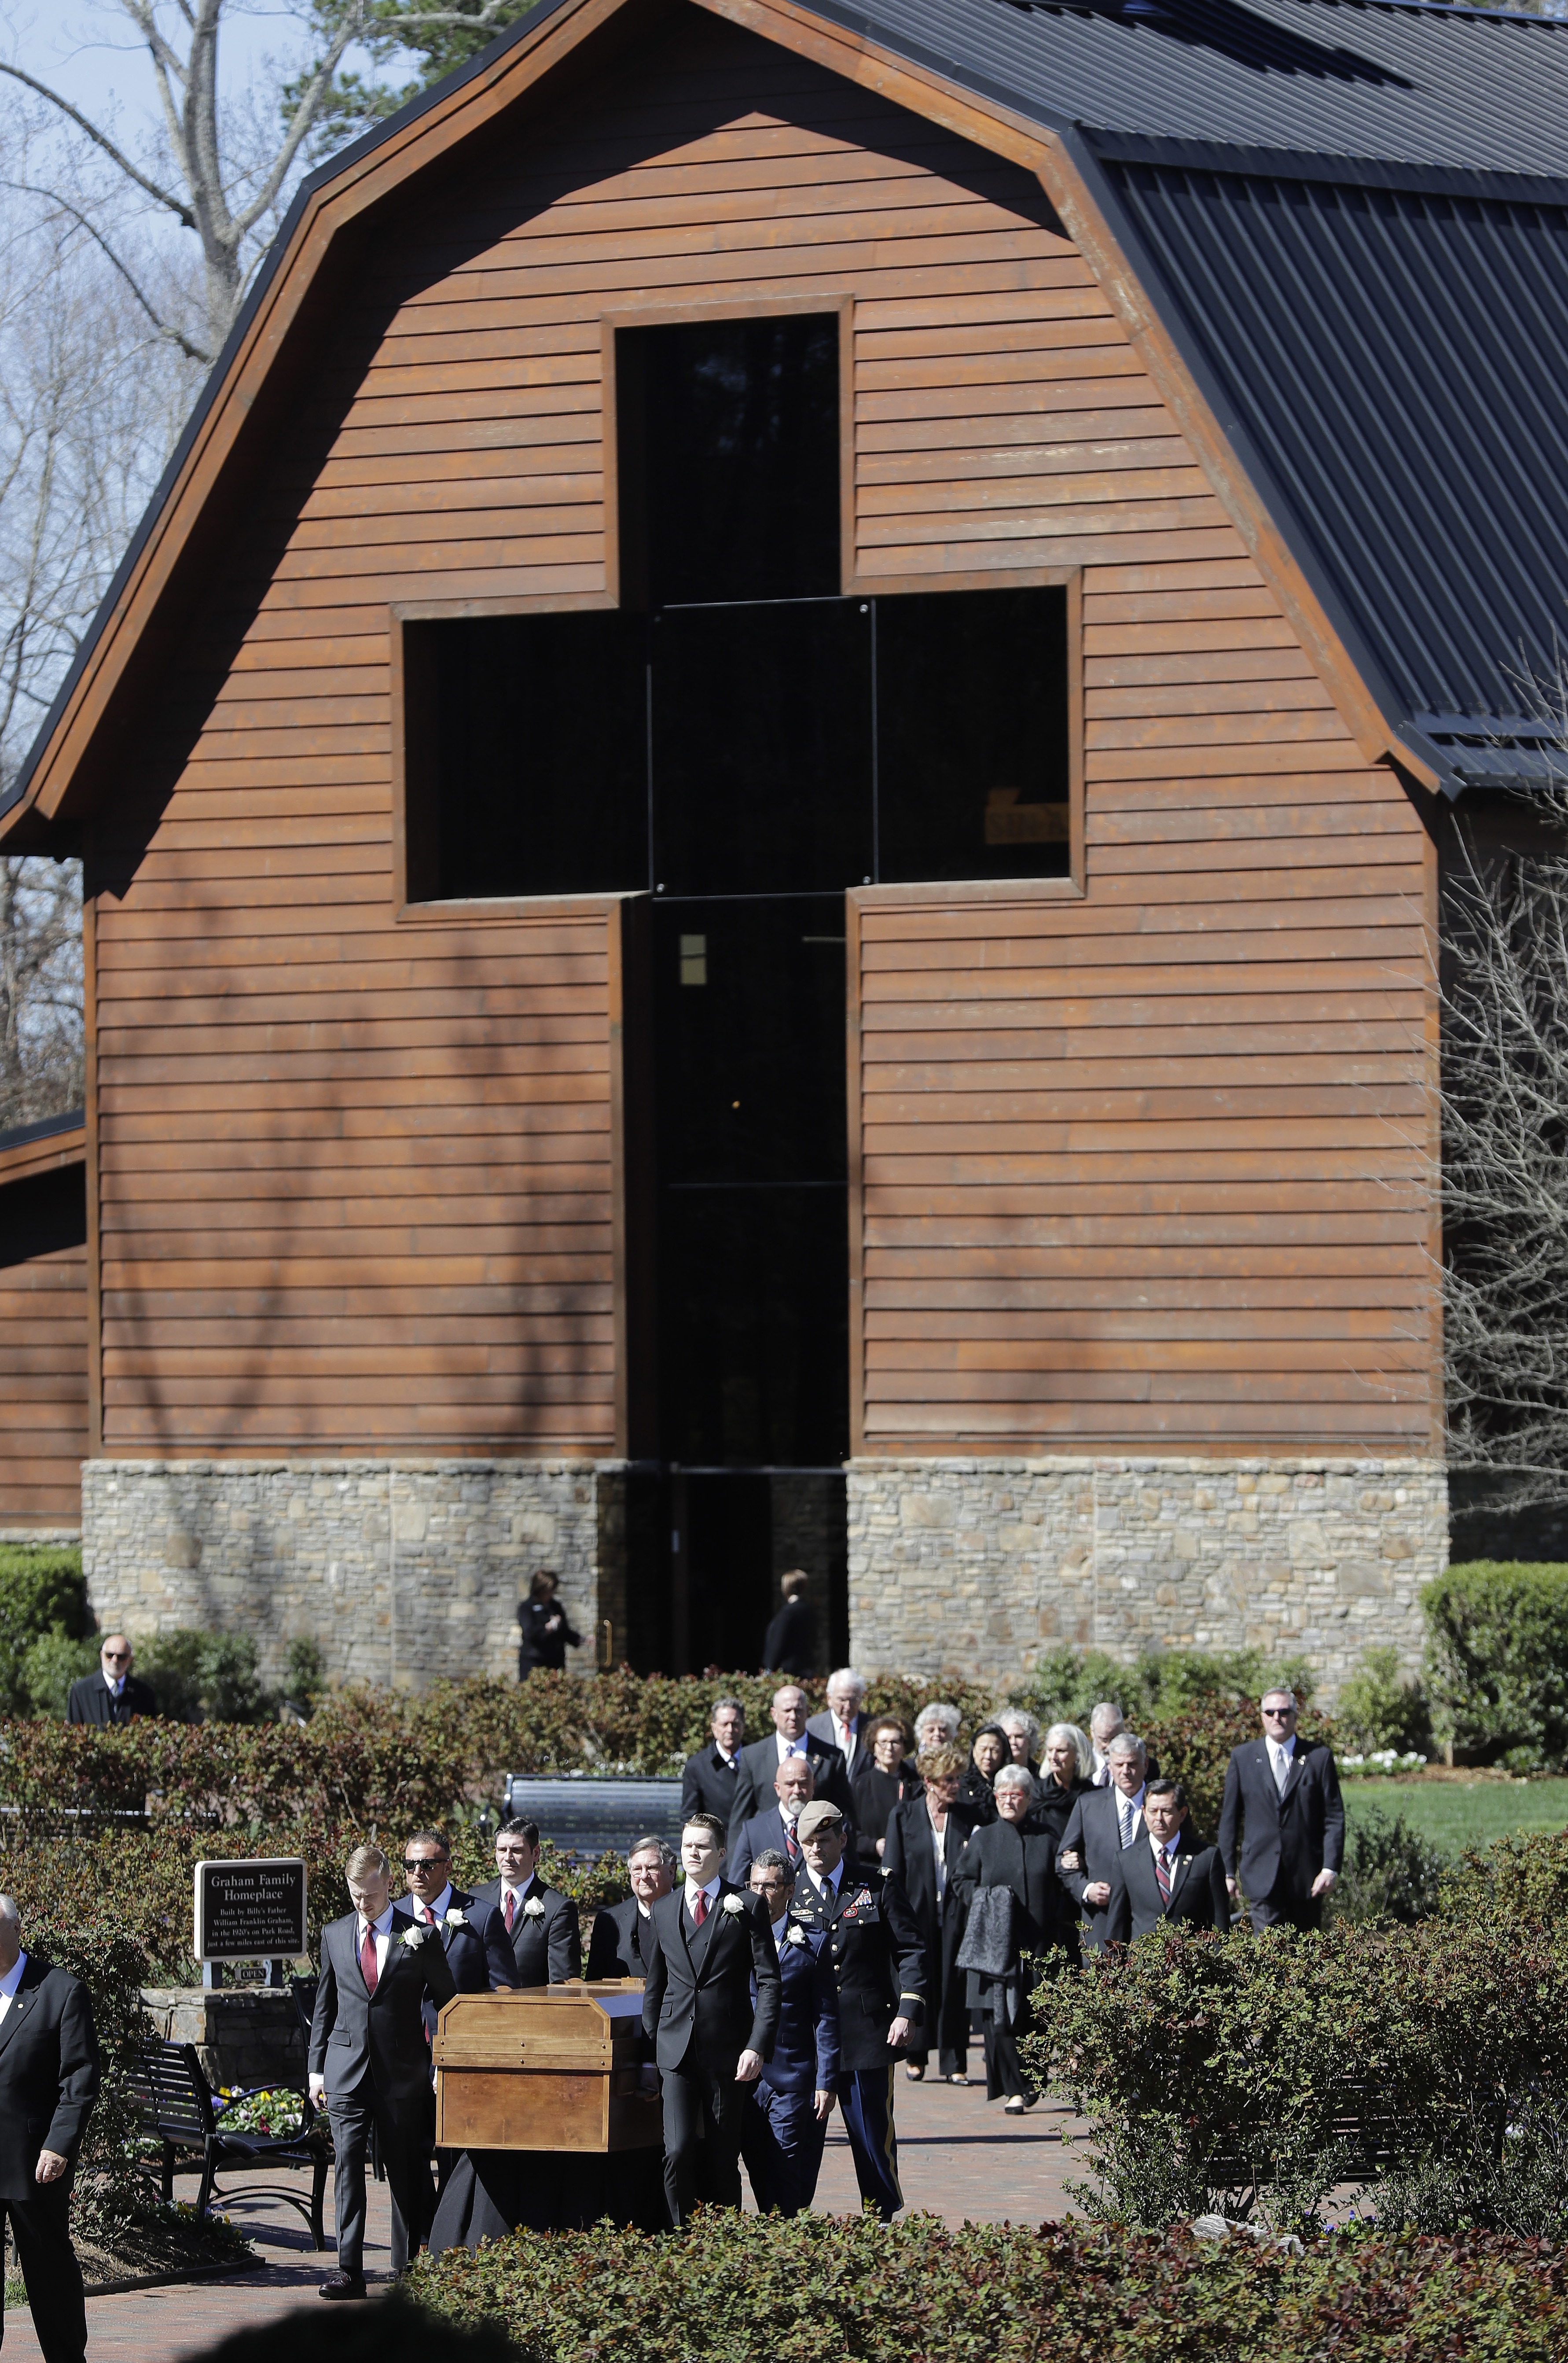 The casket of the Rev. Billy Graham is moved during his funeral service at the Billy Graham Library on Friday in Charlotte, N.C.
